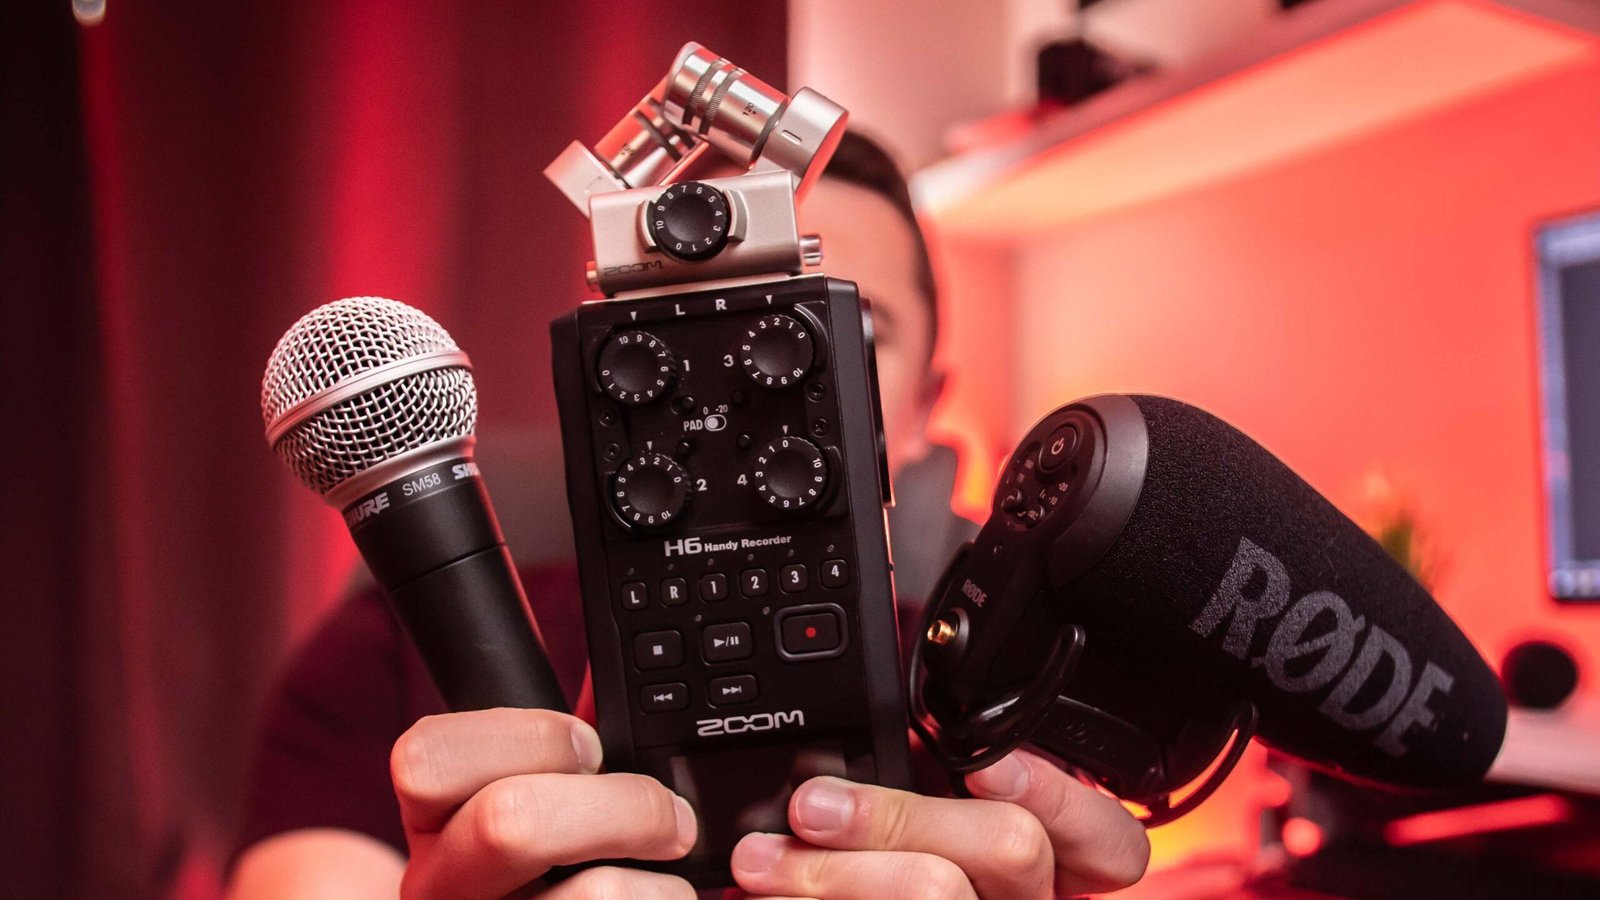 guy holding up a vocal microphone, an effects pedal, and an instrument mic showcasing gear you can get with sound equipment rental